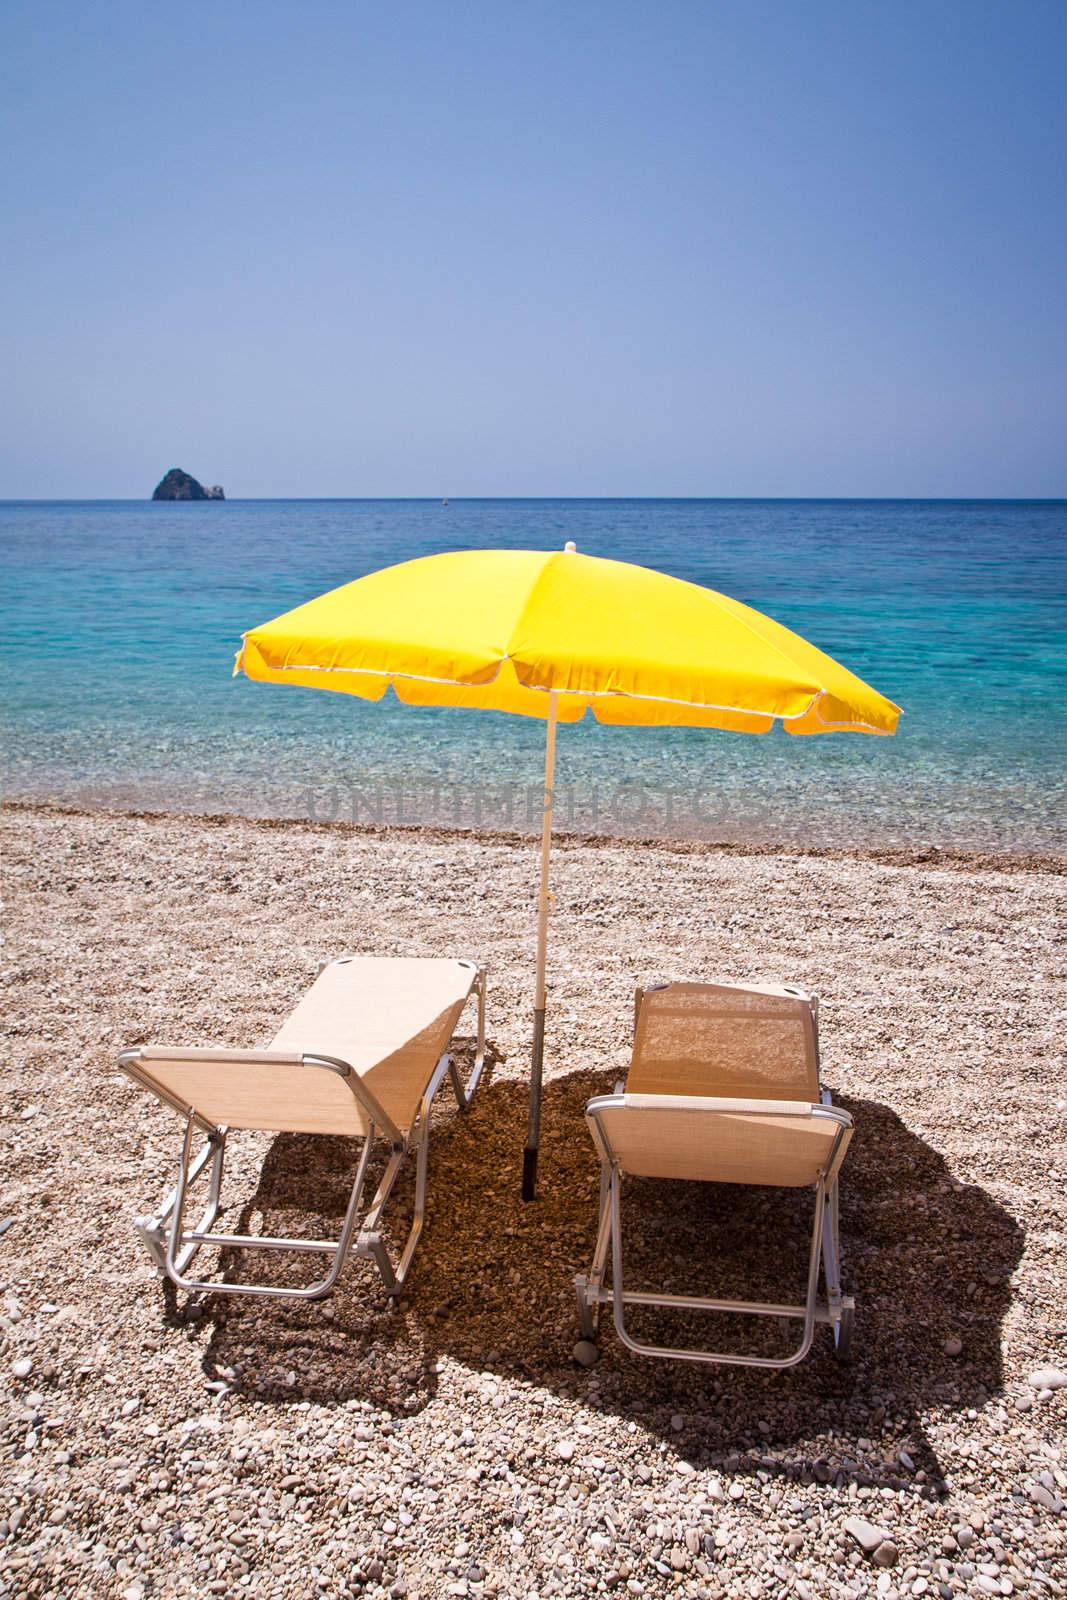 Parasol and sun loungers on the beach